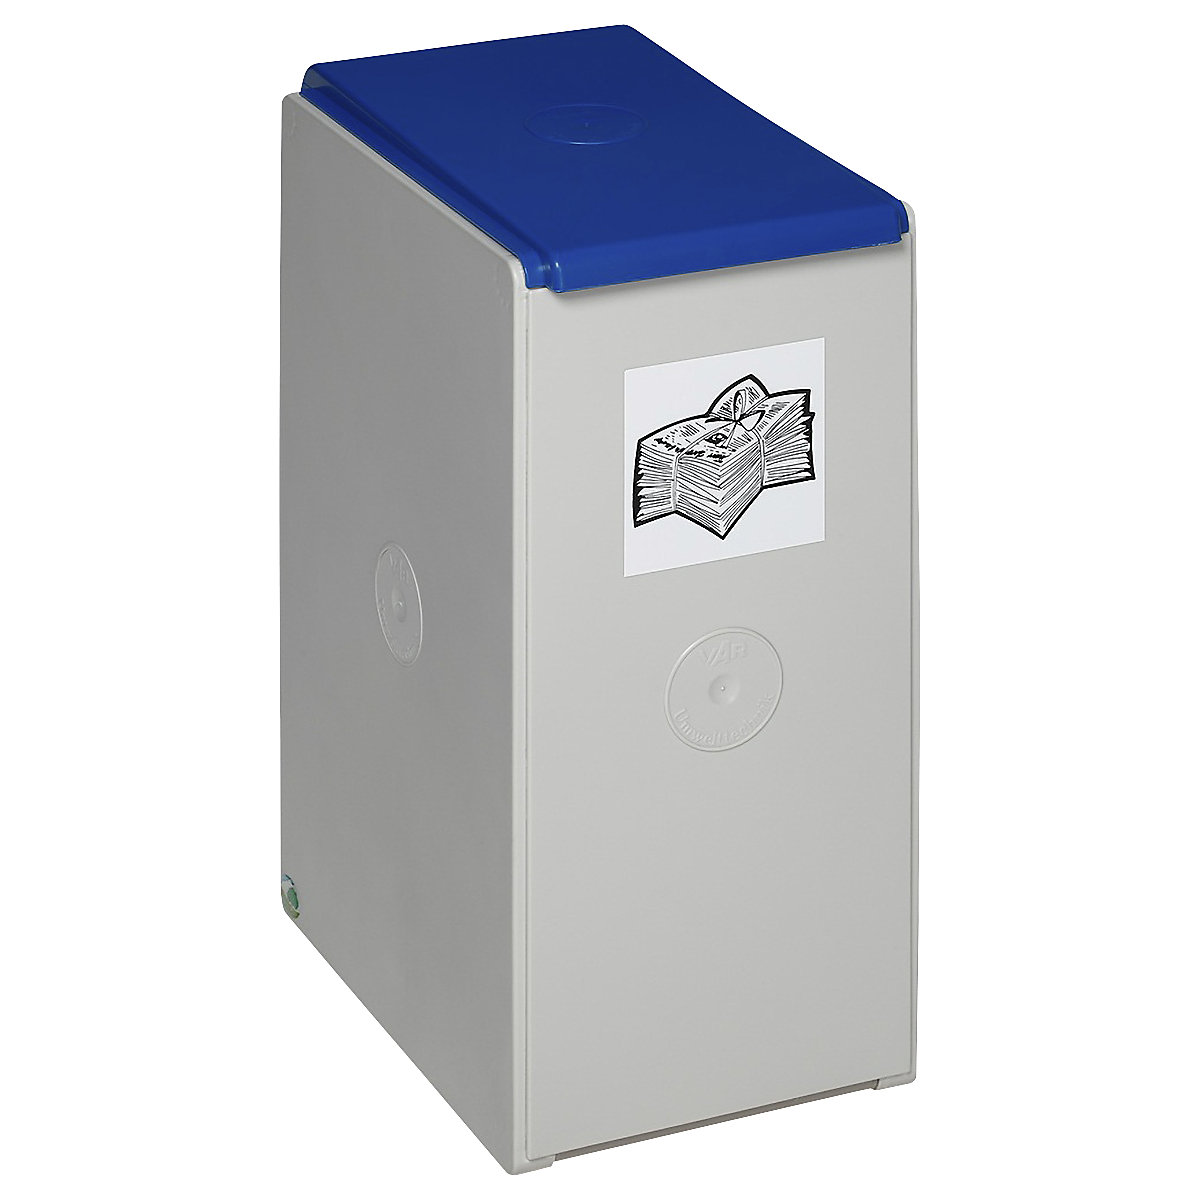 Separate collection containers for recyclables – VAR